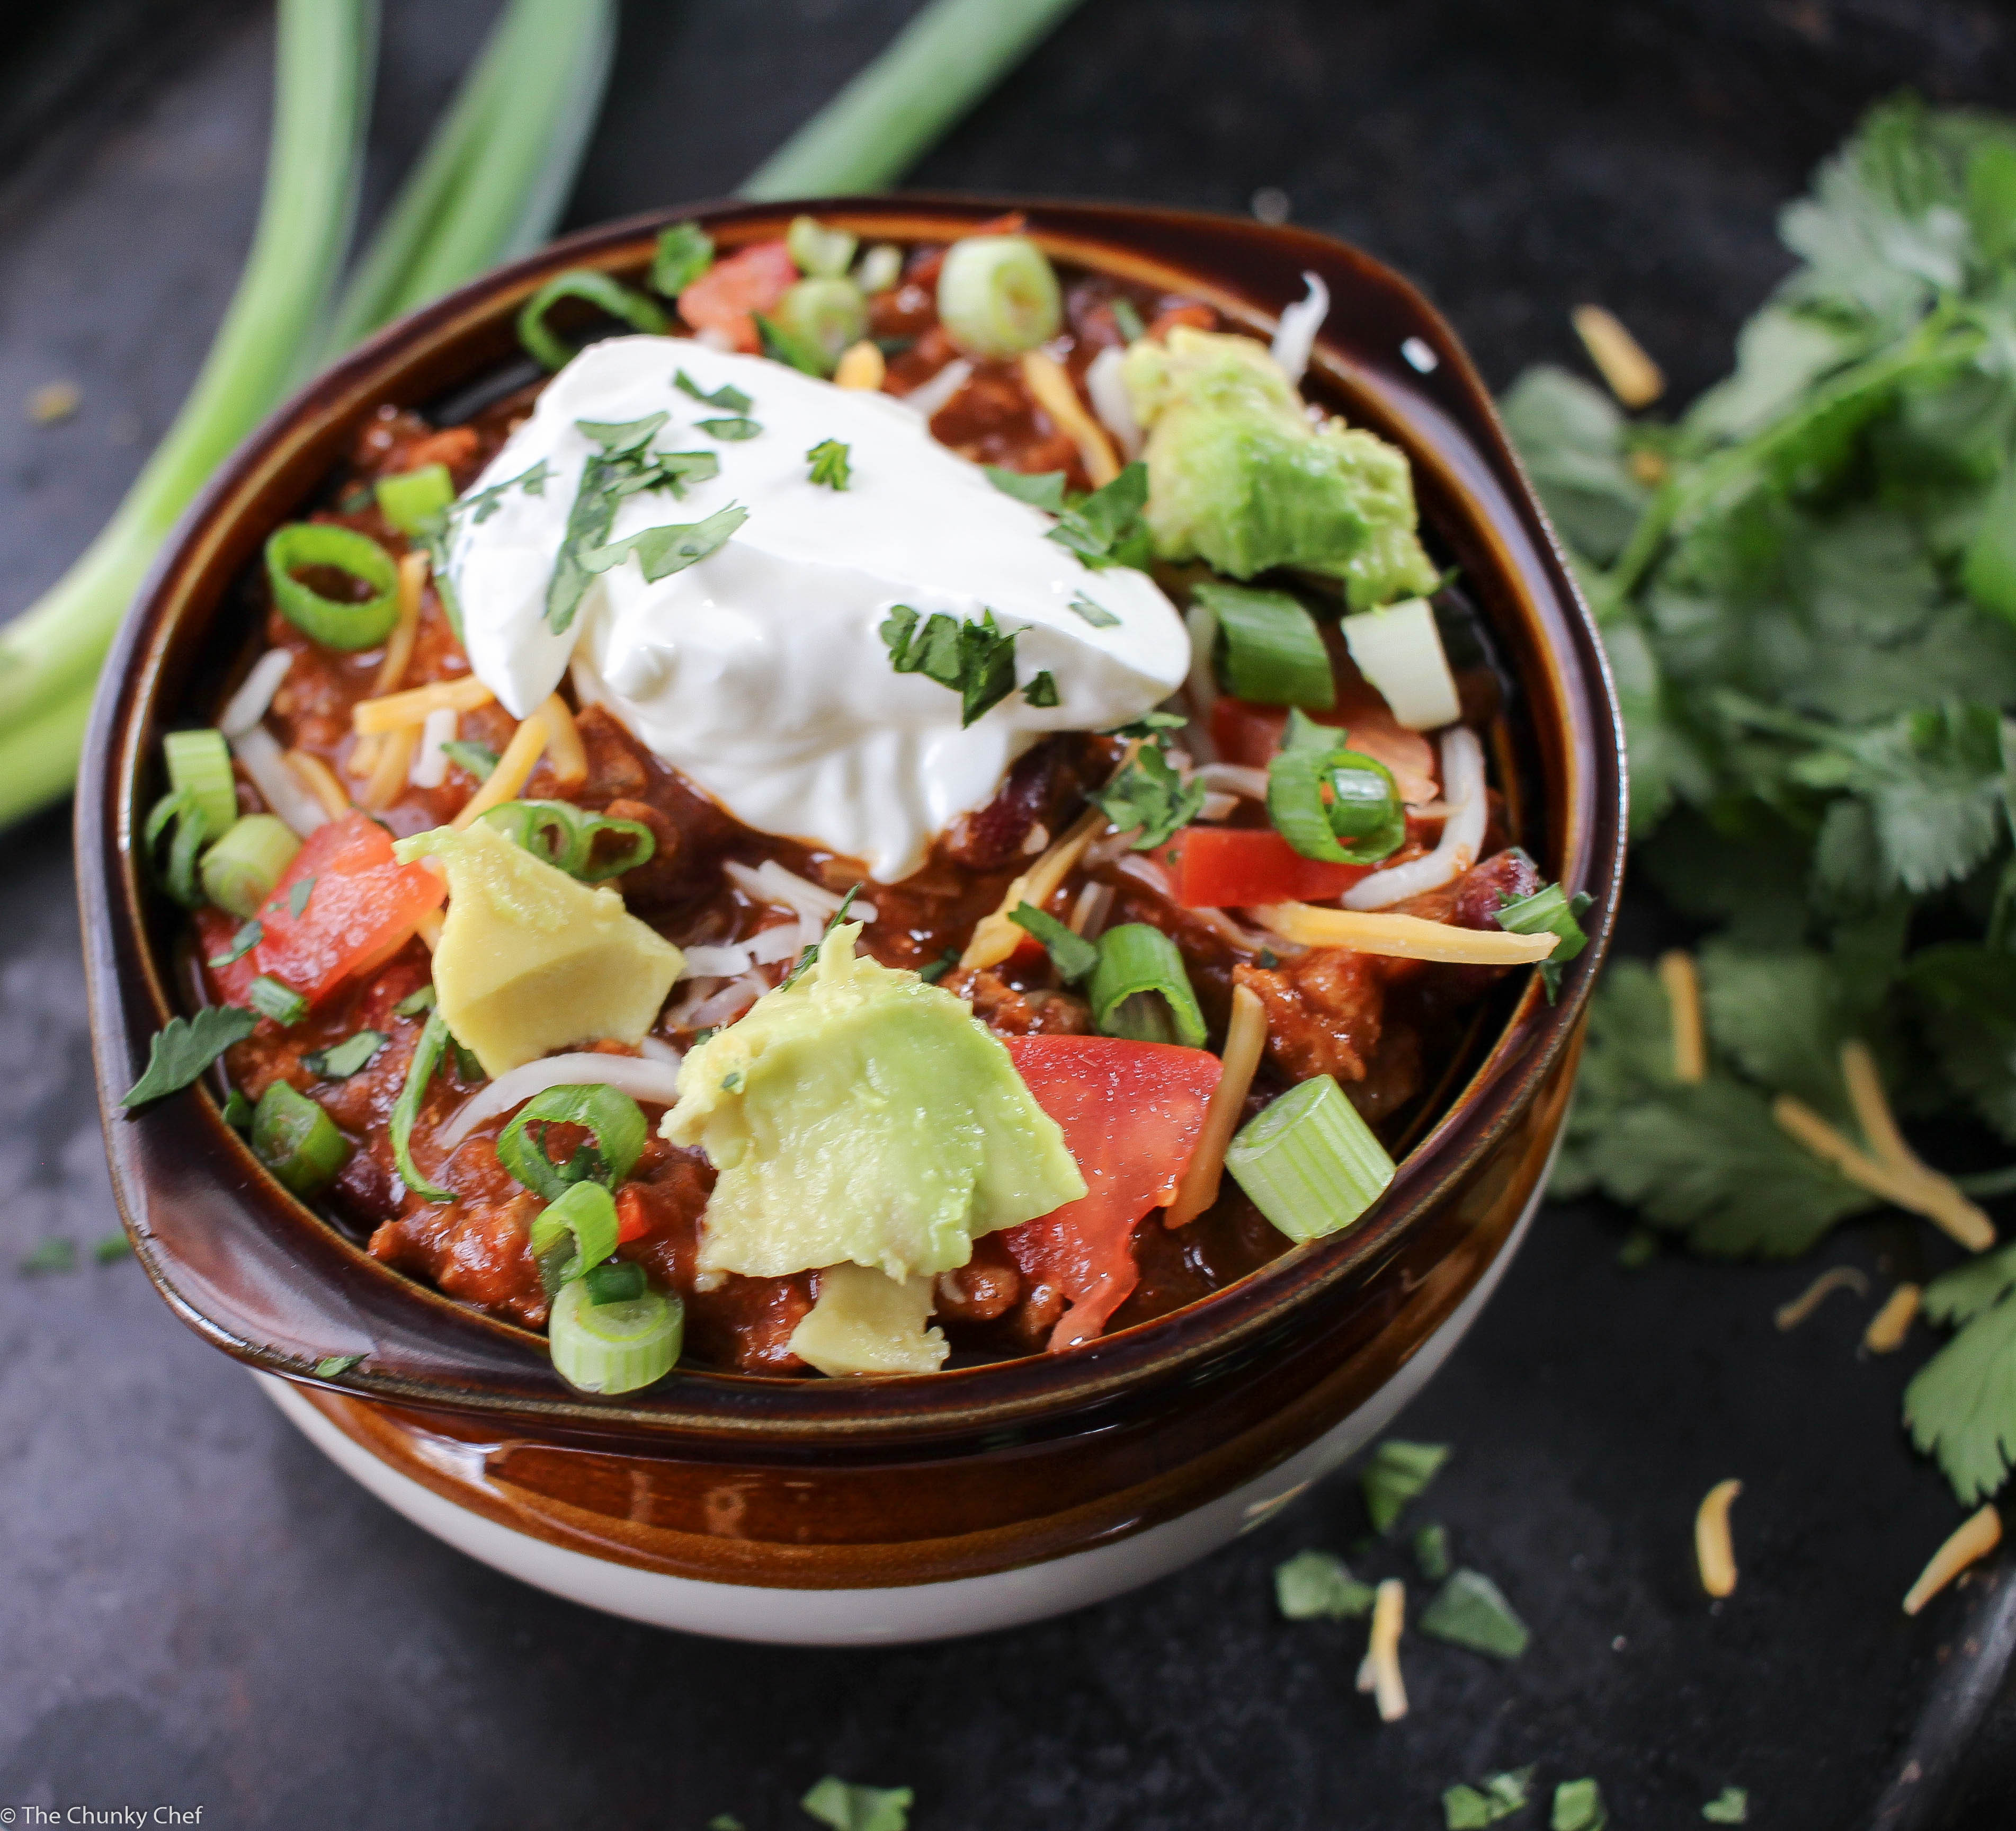 Heart Healthy Chili Recipes Heart Healthy Turkey Chili Chili is such a perfect